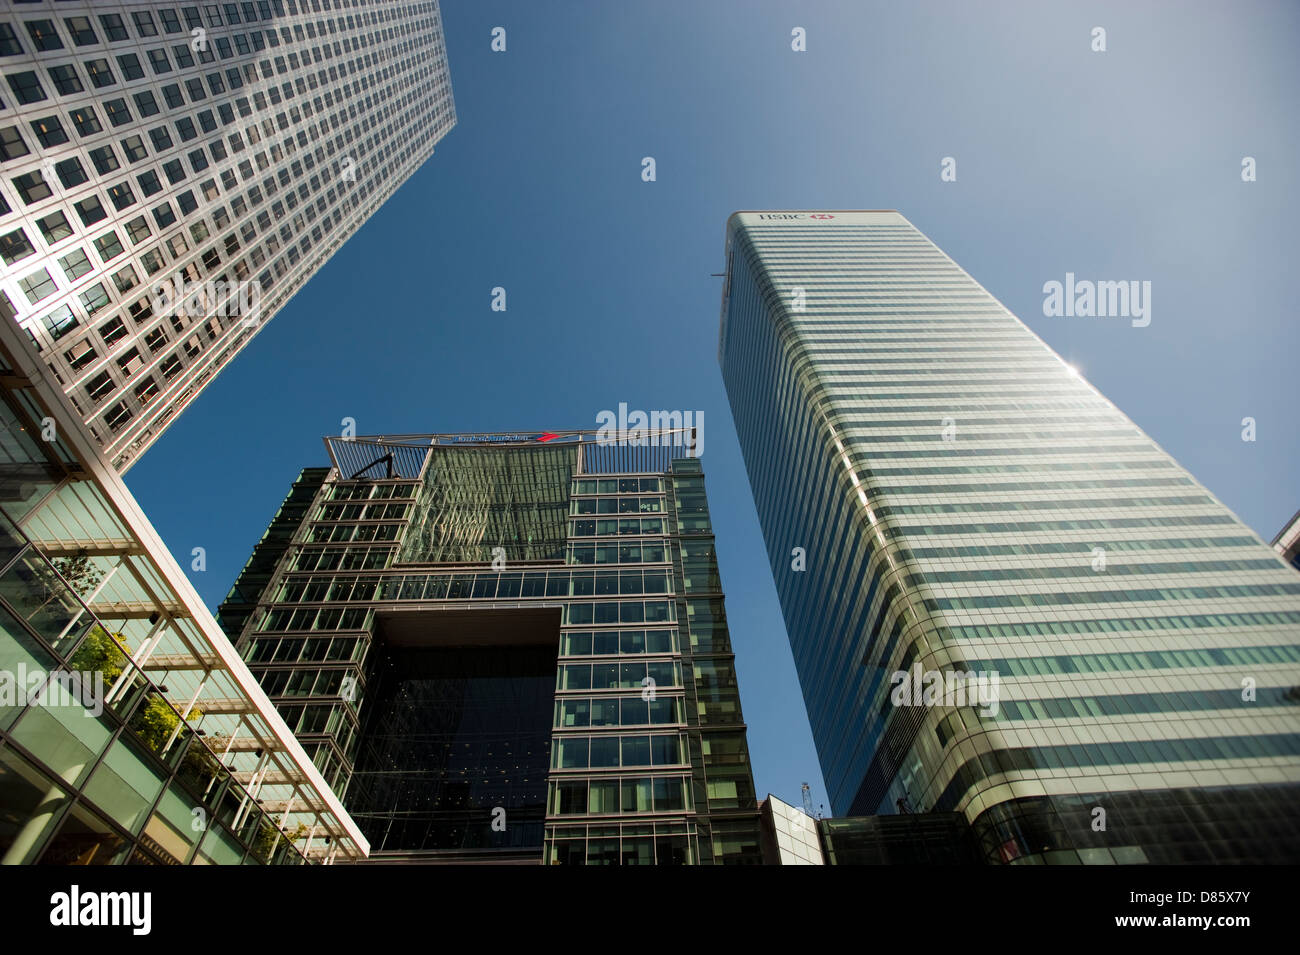 Canary Wharf Business District HSBC Building London England Stock Photo